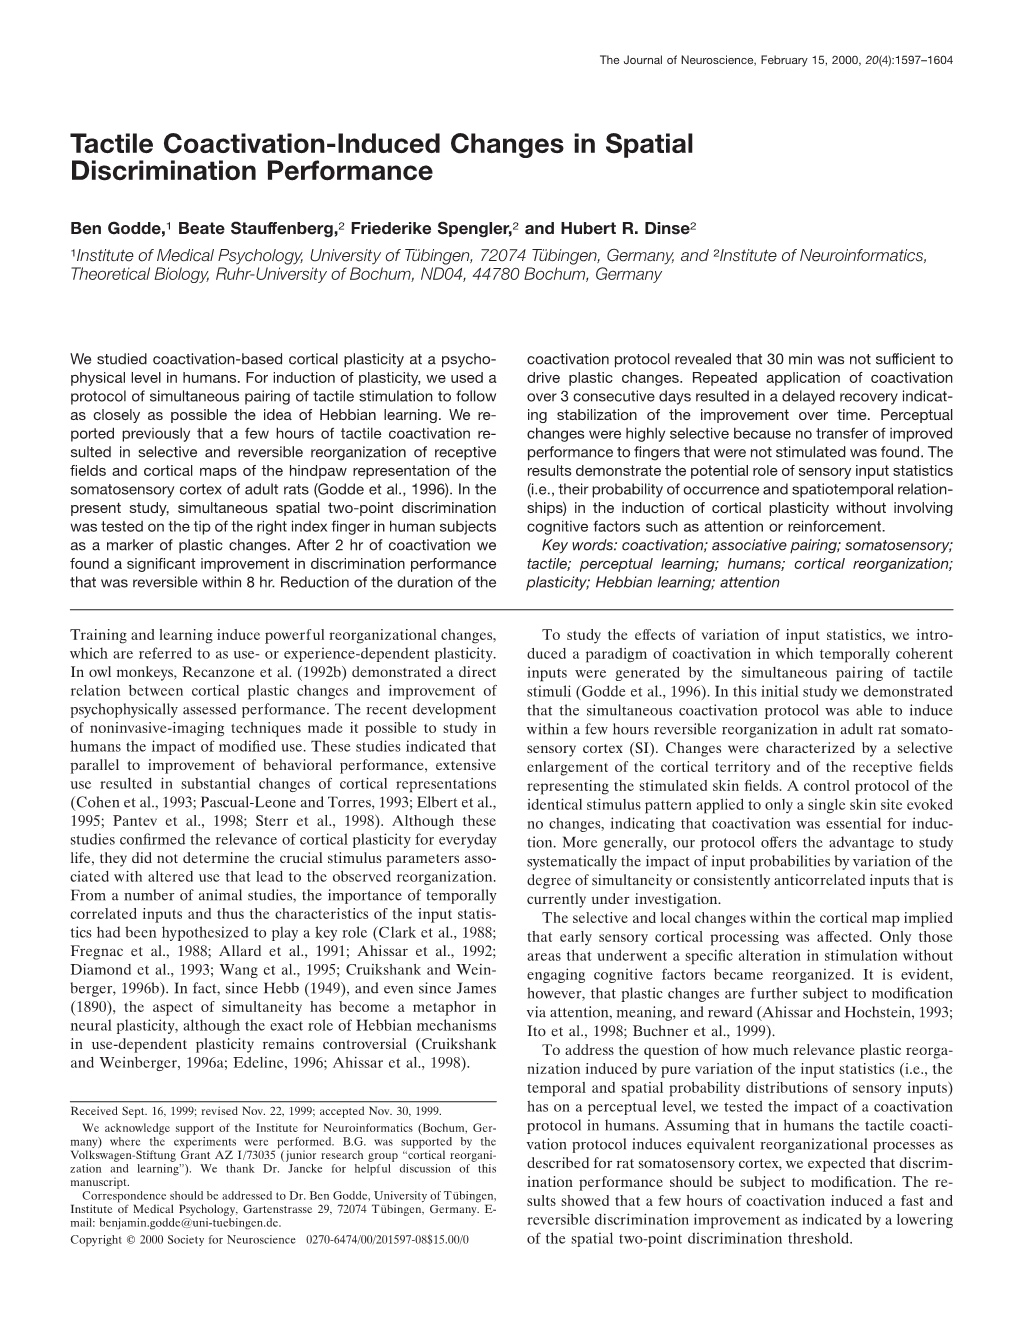 Tactile Coactivation-Induced Changes in Spatial Discrimination Performance